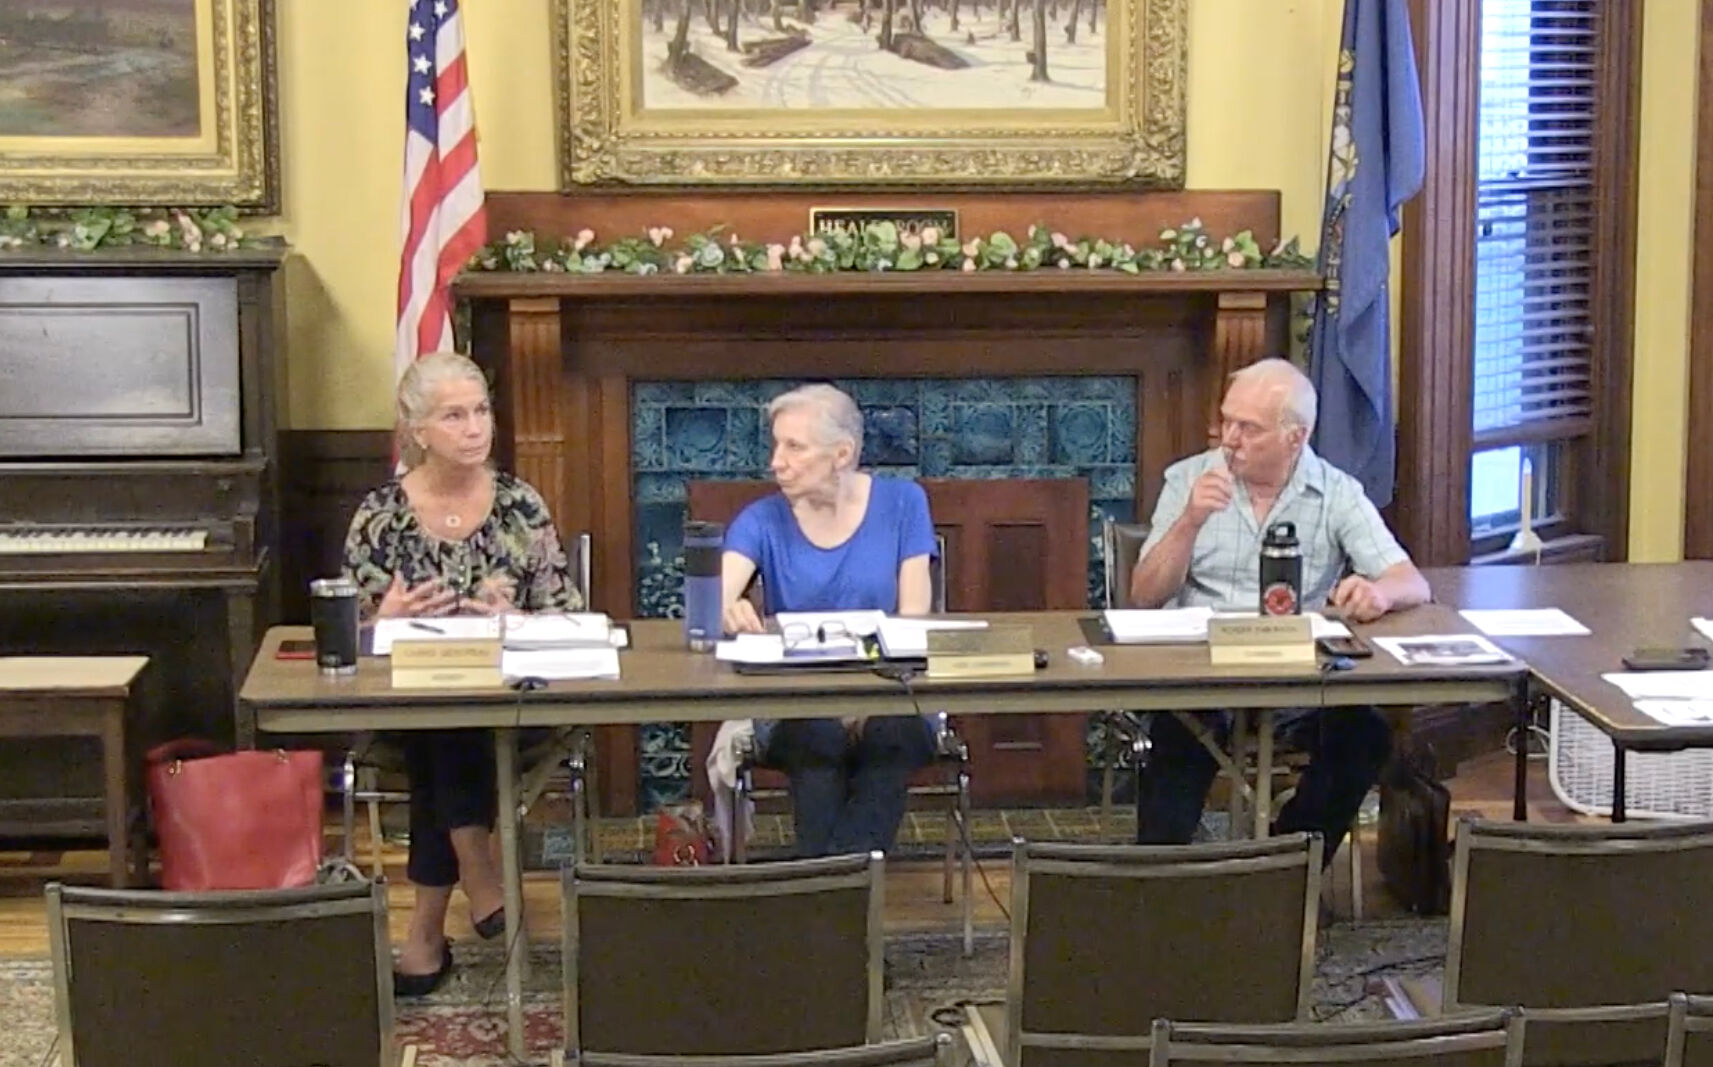 New Hampshire state Sen. Carrie Gendreau (R) took issue with the murals at an August meeting.